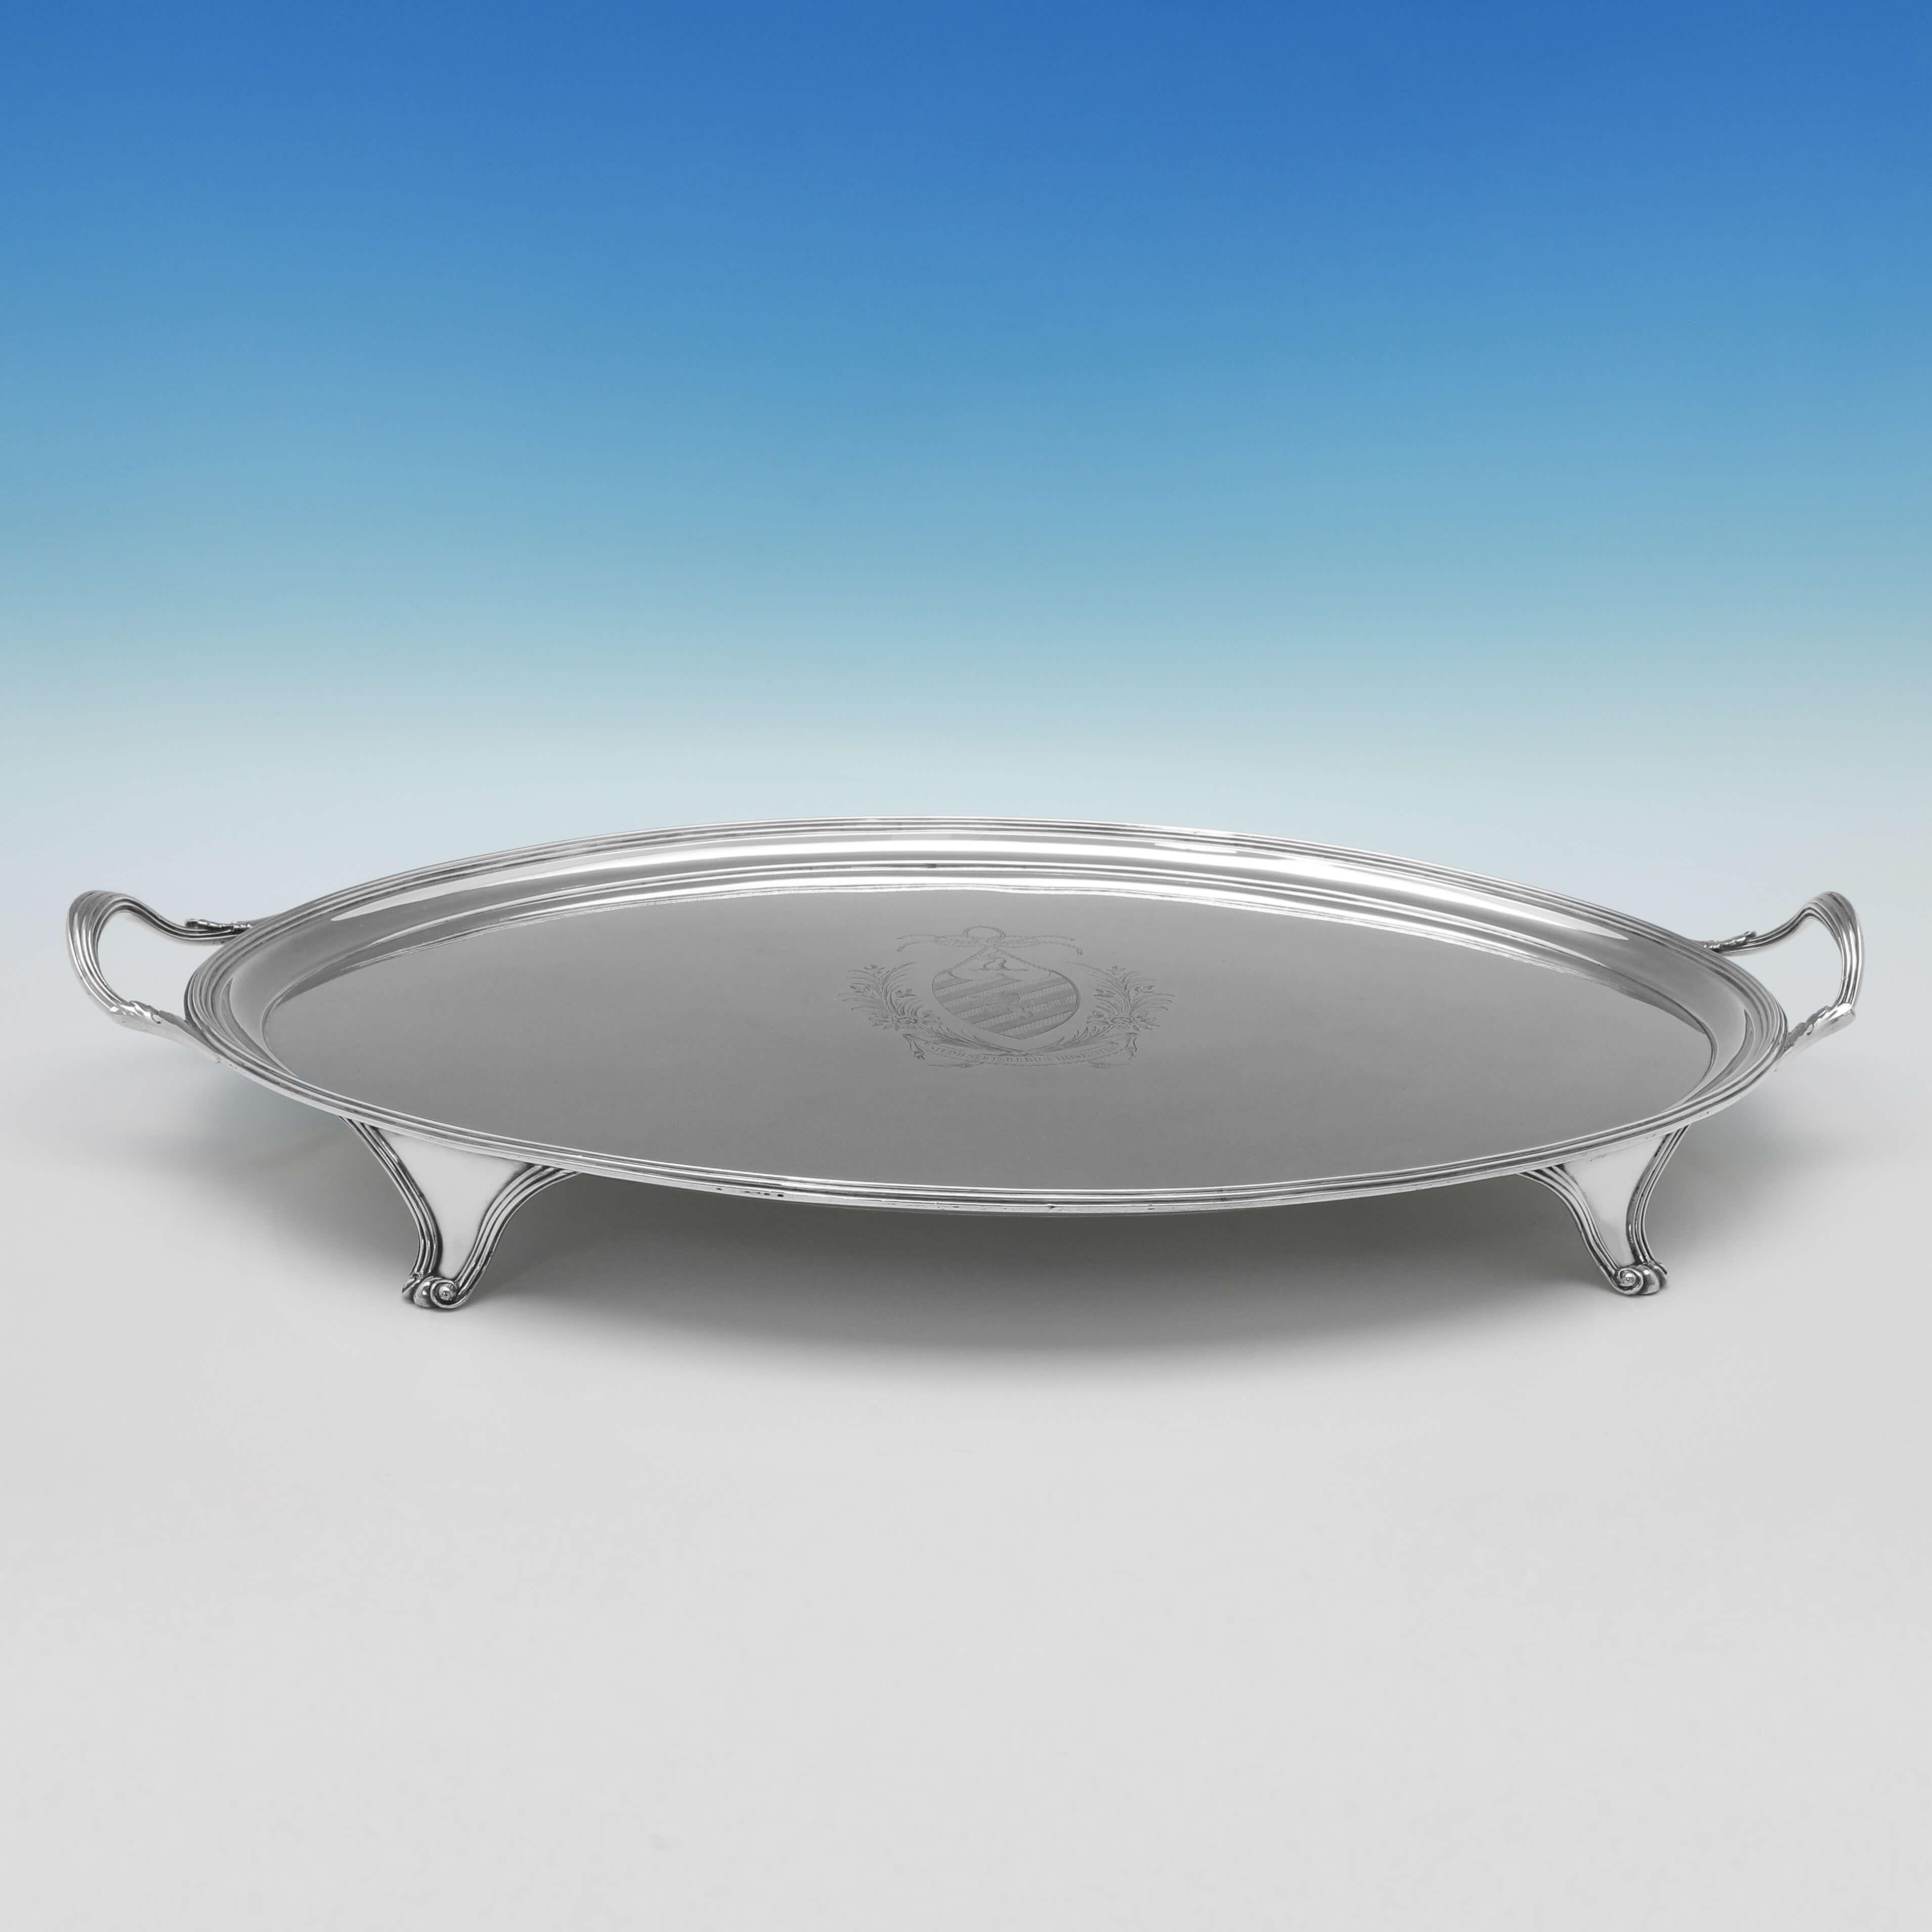 Hallmarked in London in 1794 by George Smith II & Thomas Hayter, this very handsome, George III, antique Sterling Silver tray, stands on four scroll feet, and features reed borders and an engraved coat of arms and motto to the centre. The tray